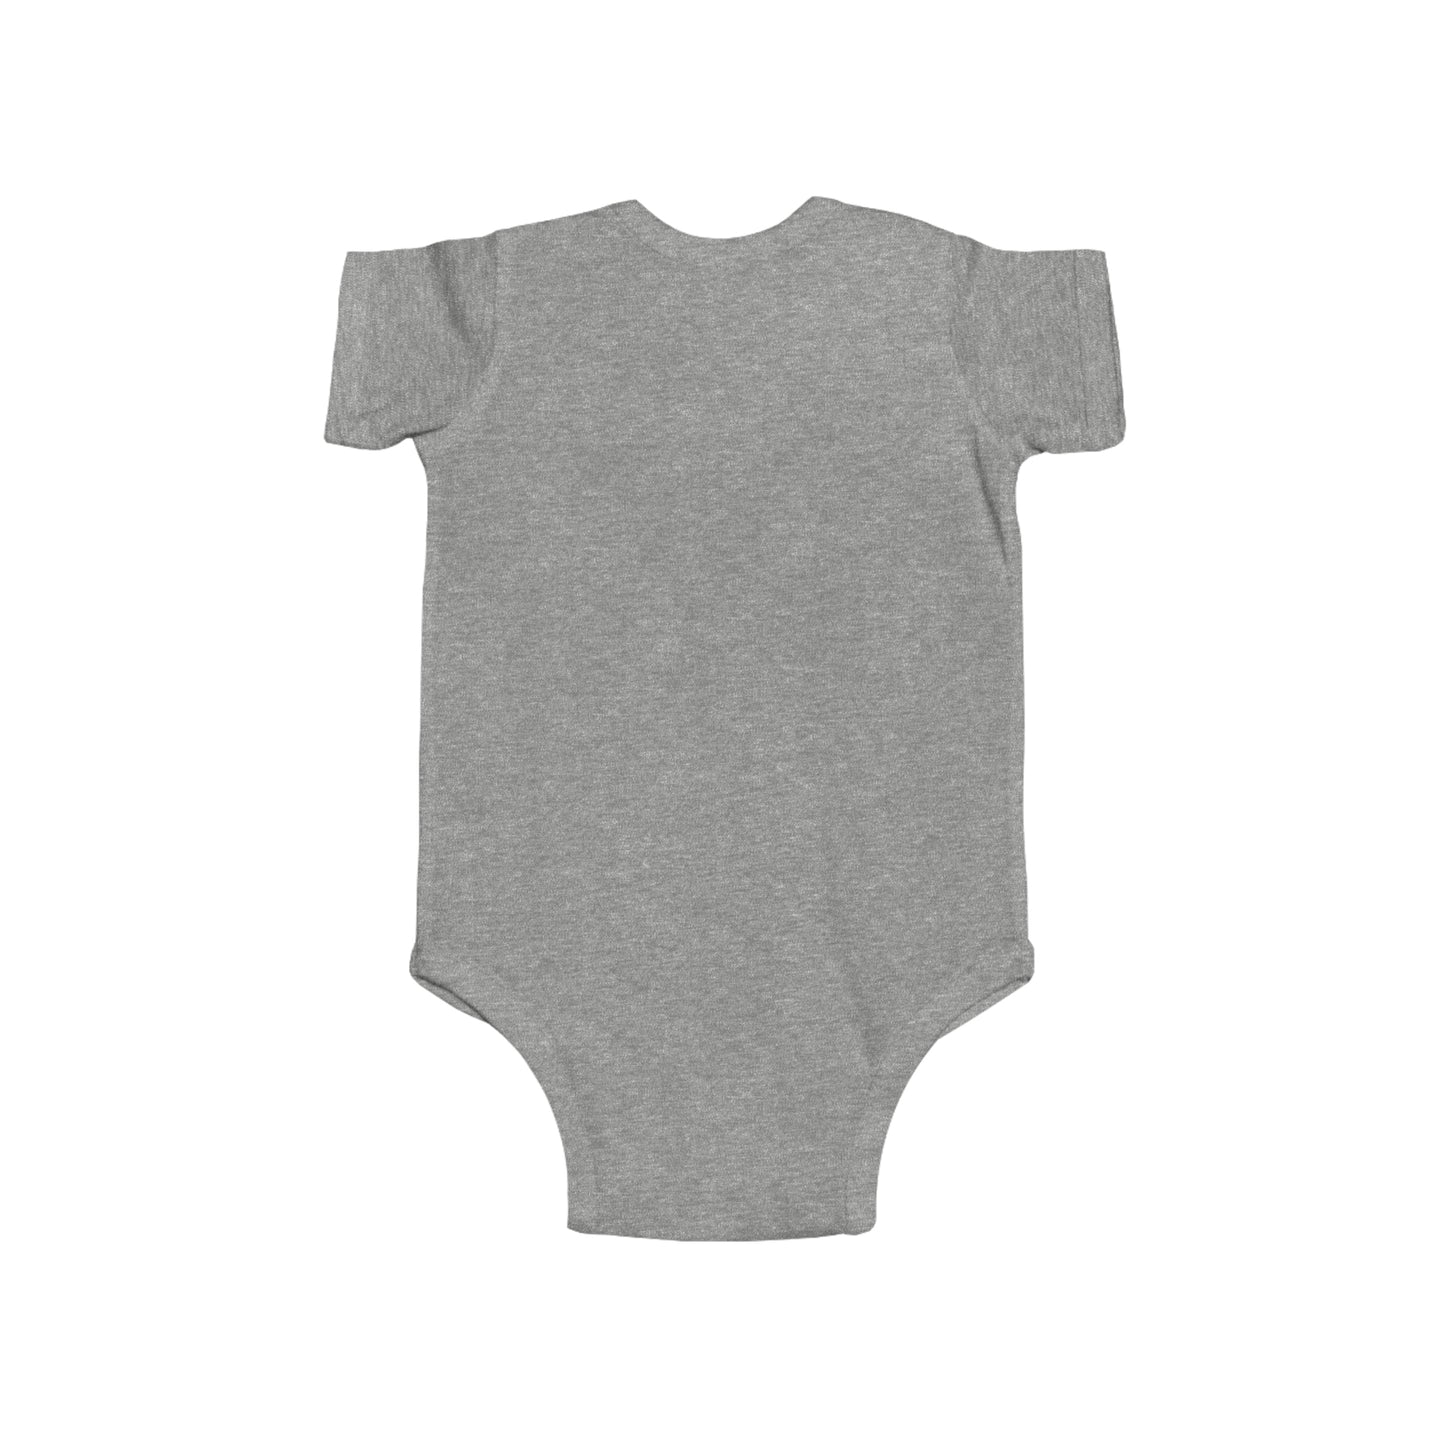 Love, New Arrival, Handle With Care- Baby, Infant, Toddler, Soft Cotton, Onesie